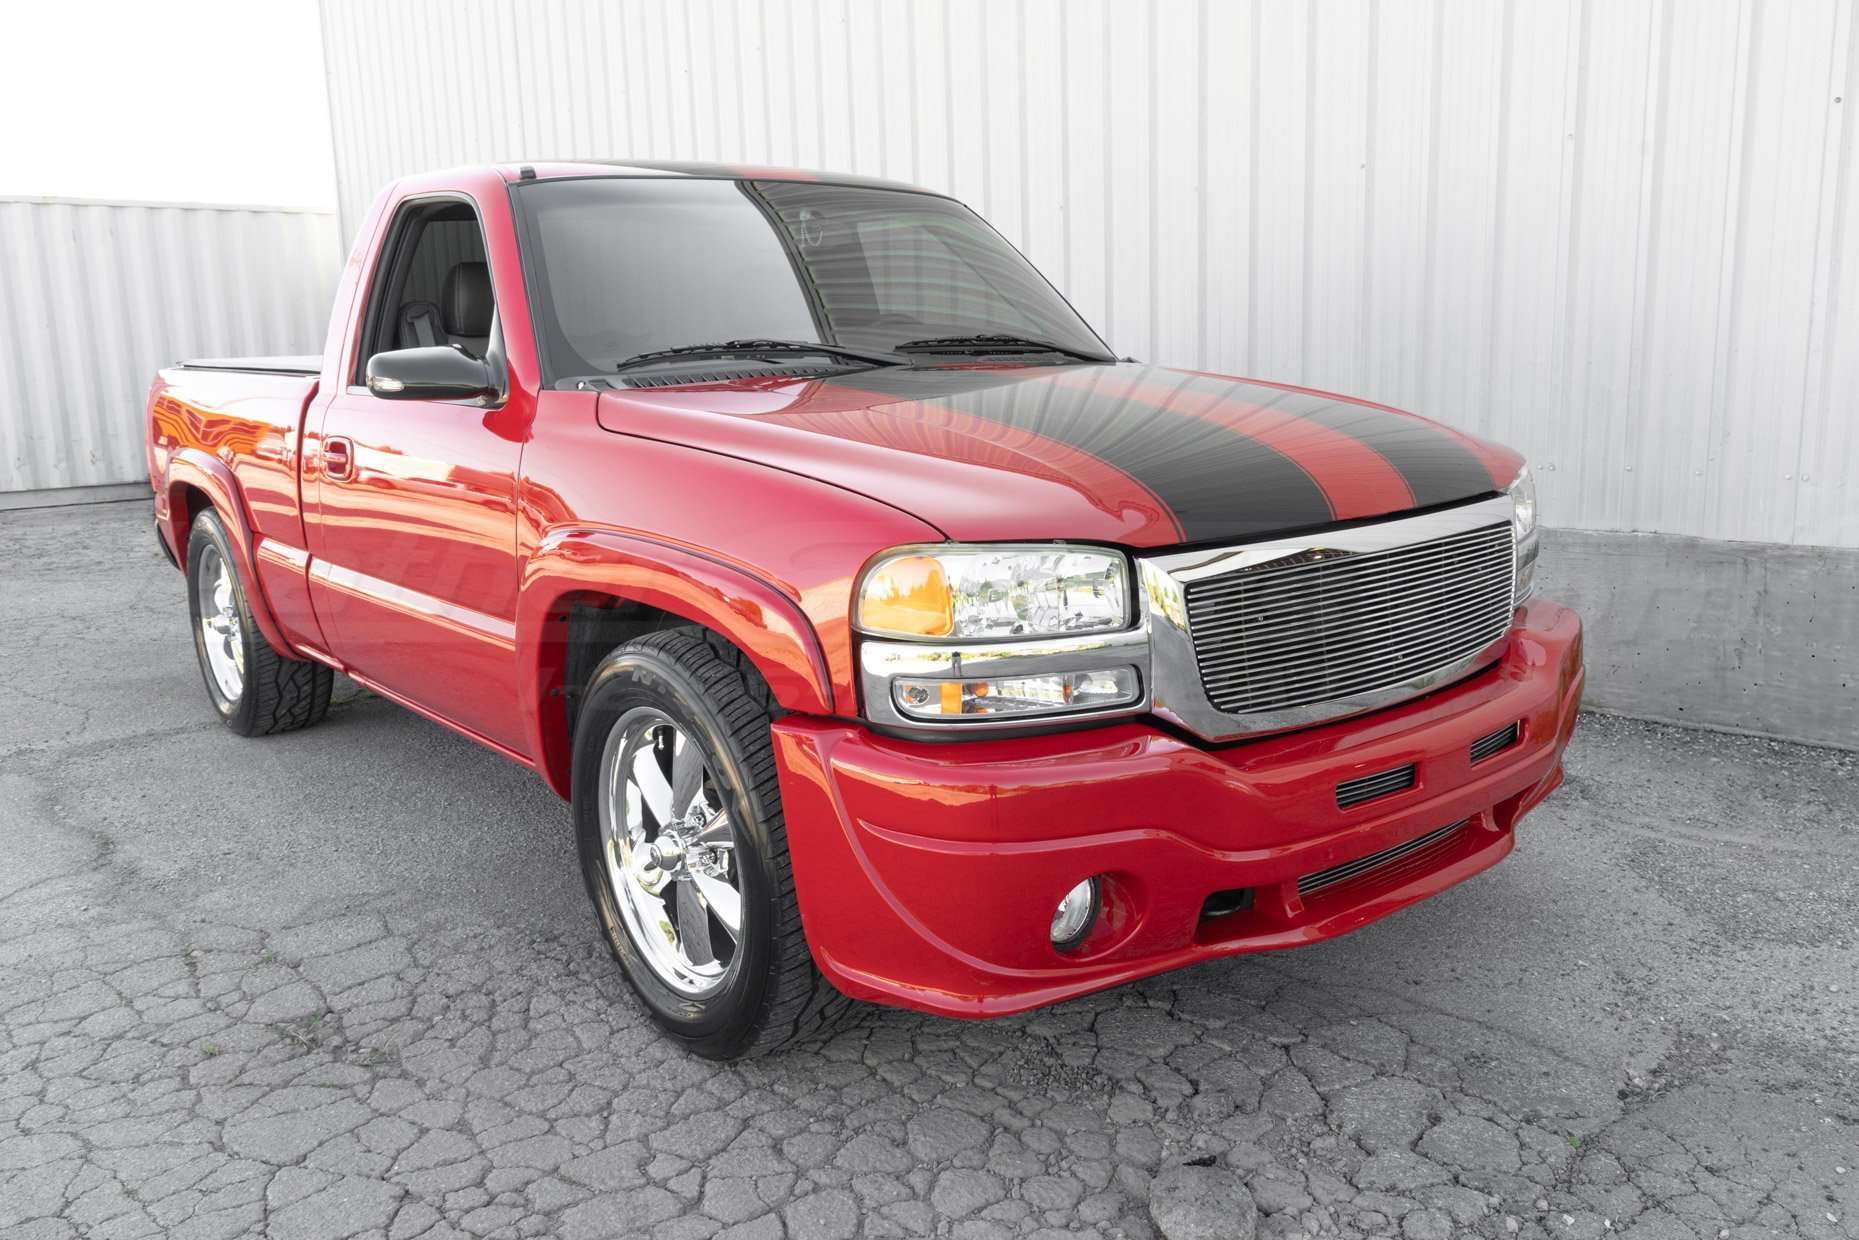 2007 GMC Sierra Exterior in Bright Red with Black racing stripes